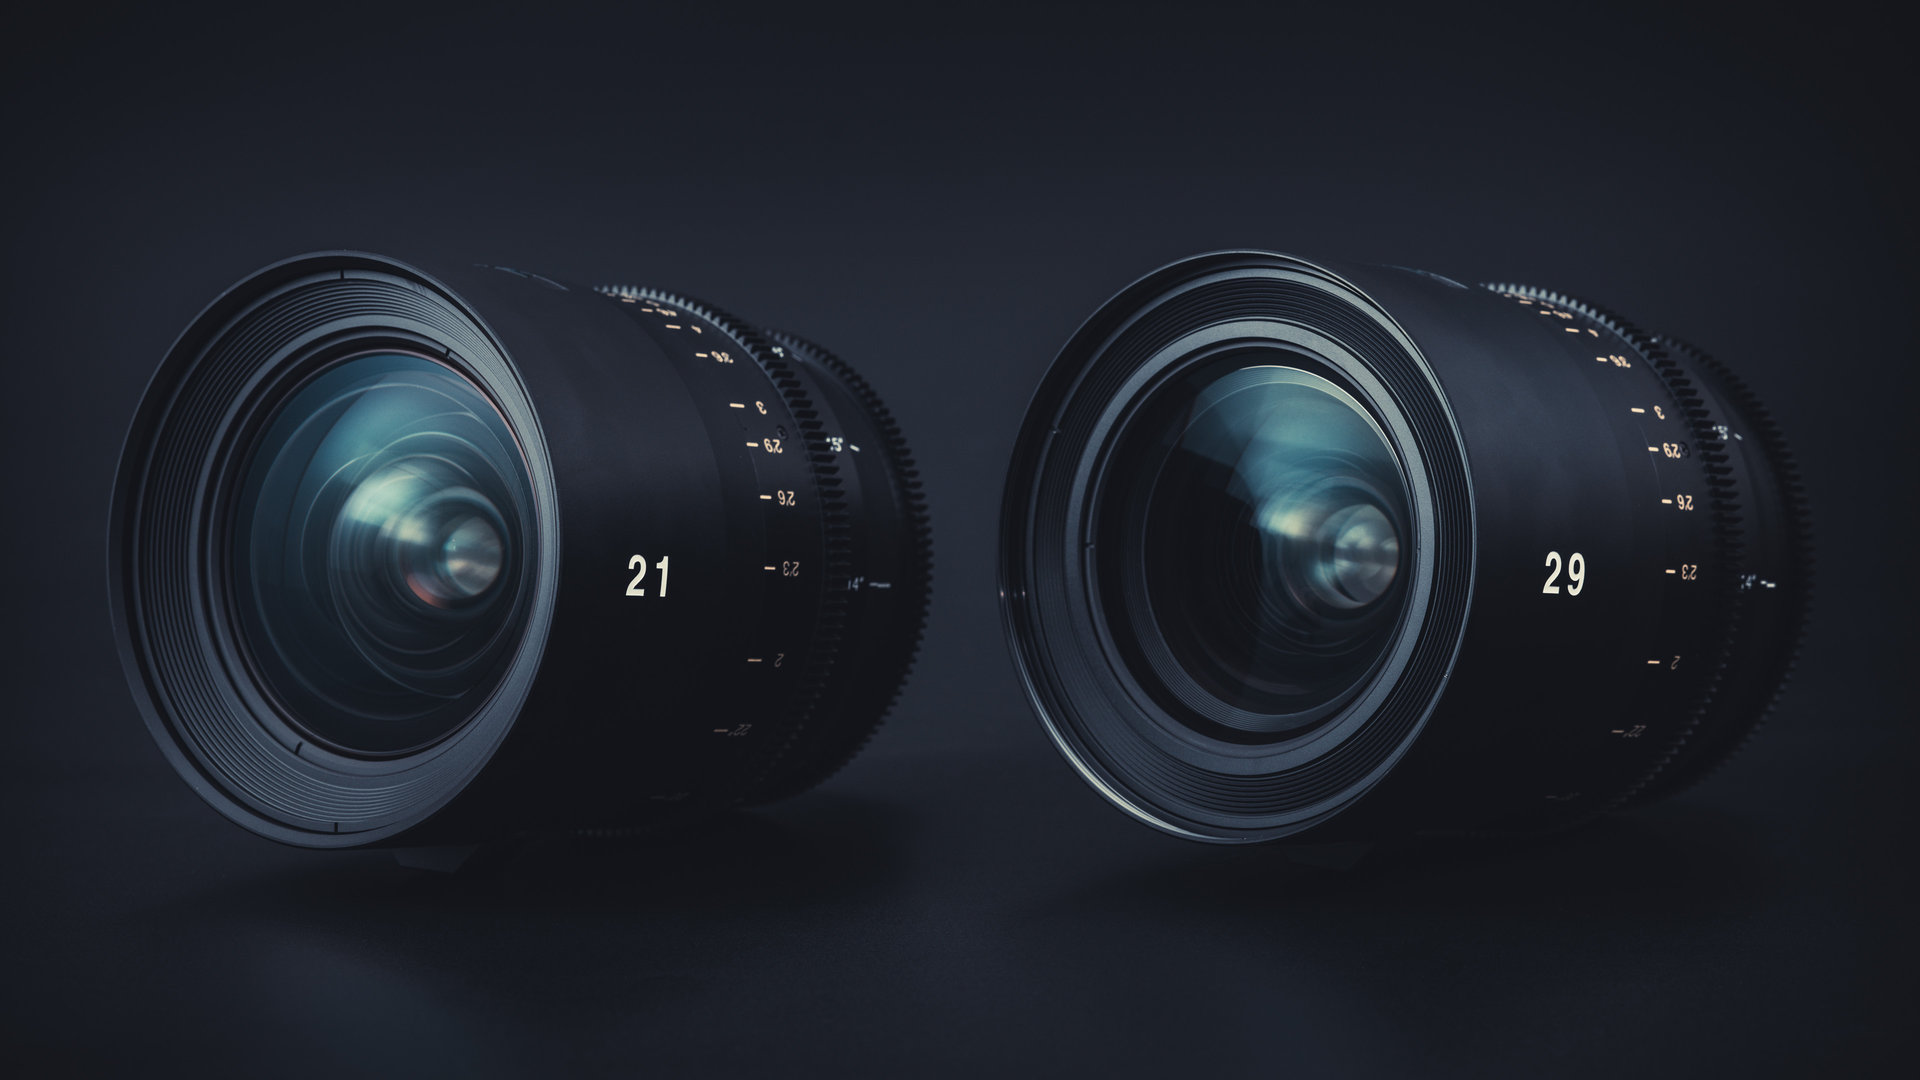 Tokina releases 21mm T1.5 and 29mm T1.5 Cinema Vista Prime lenses